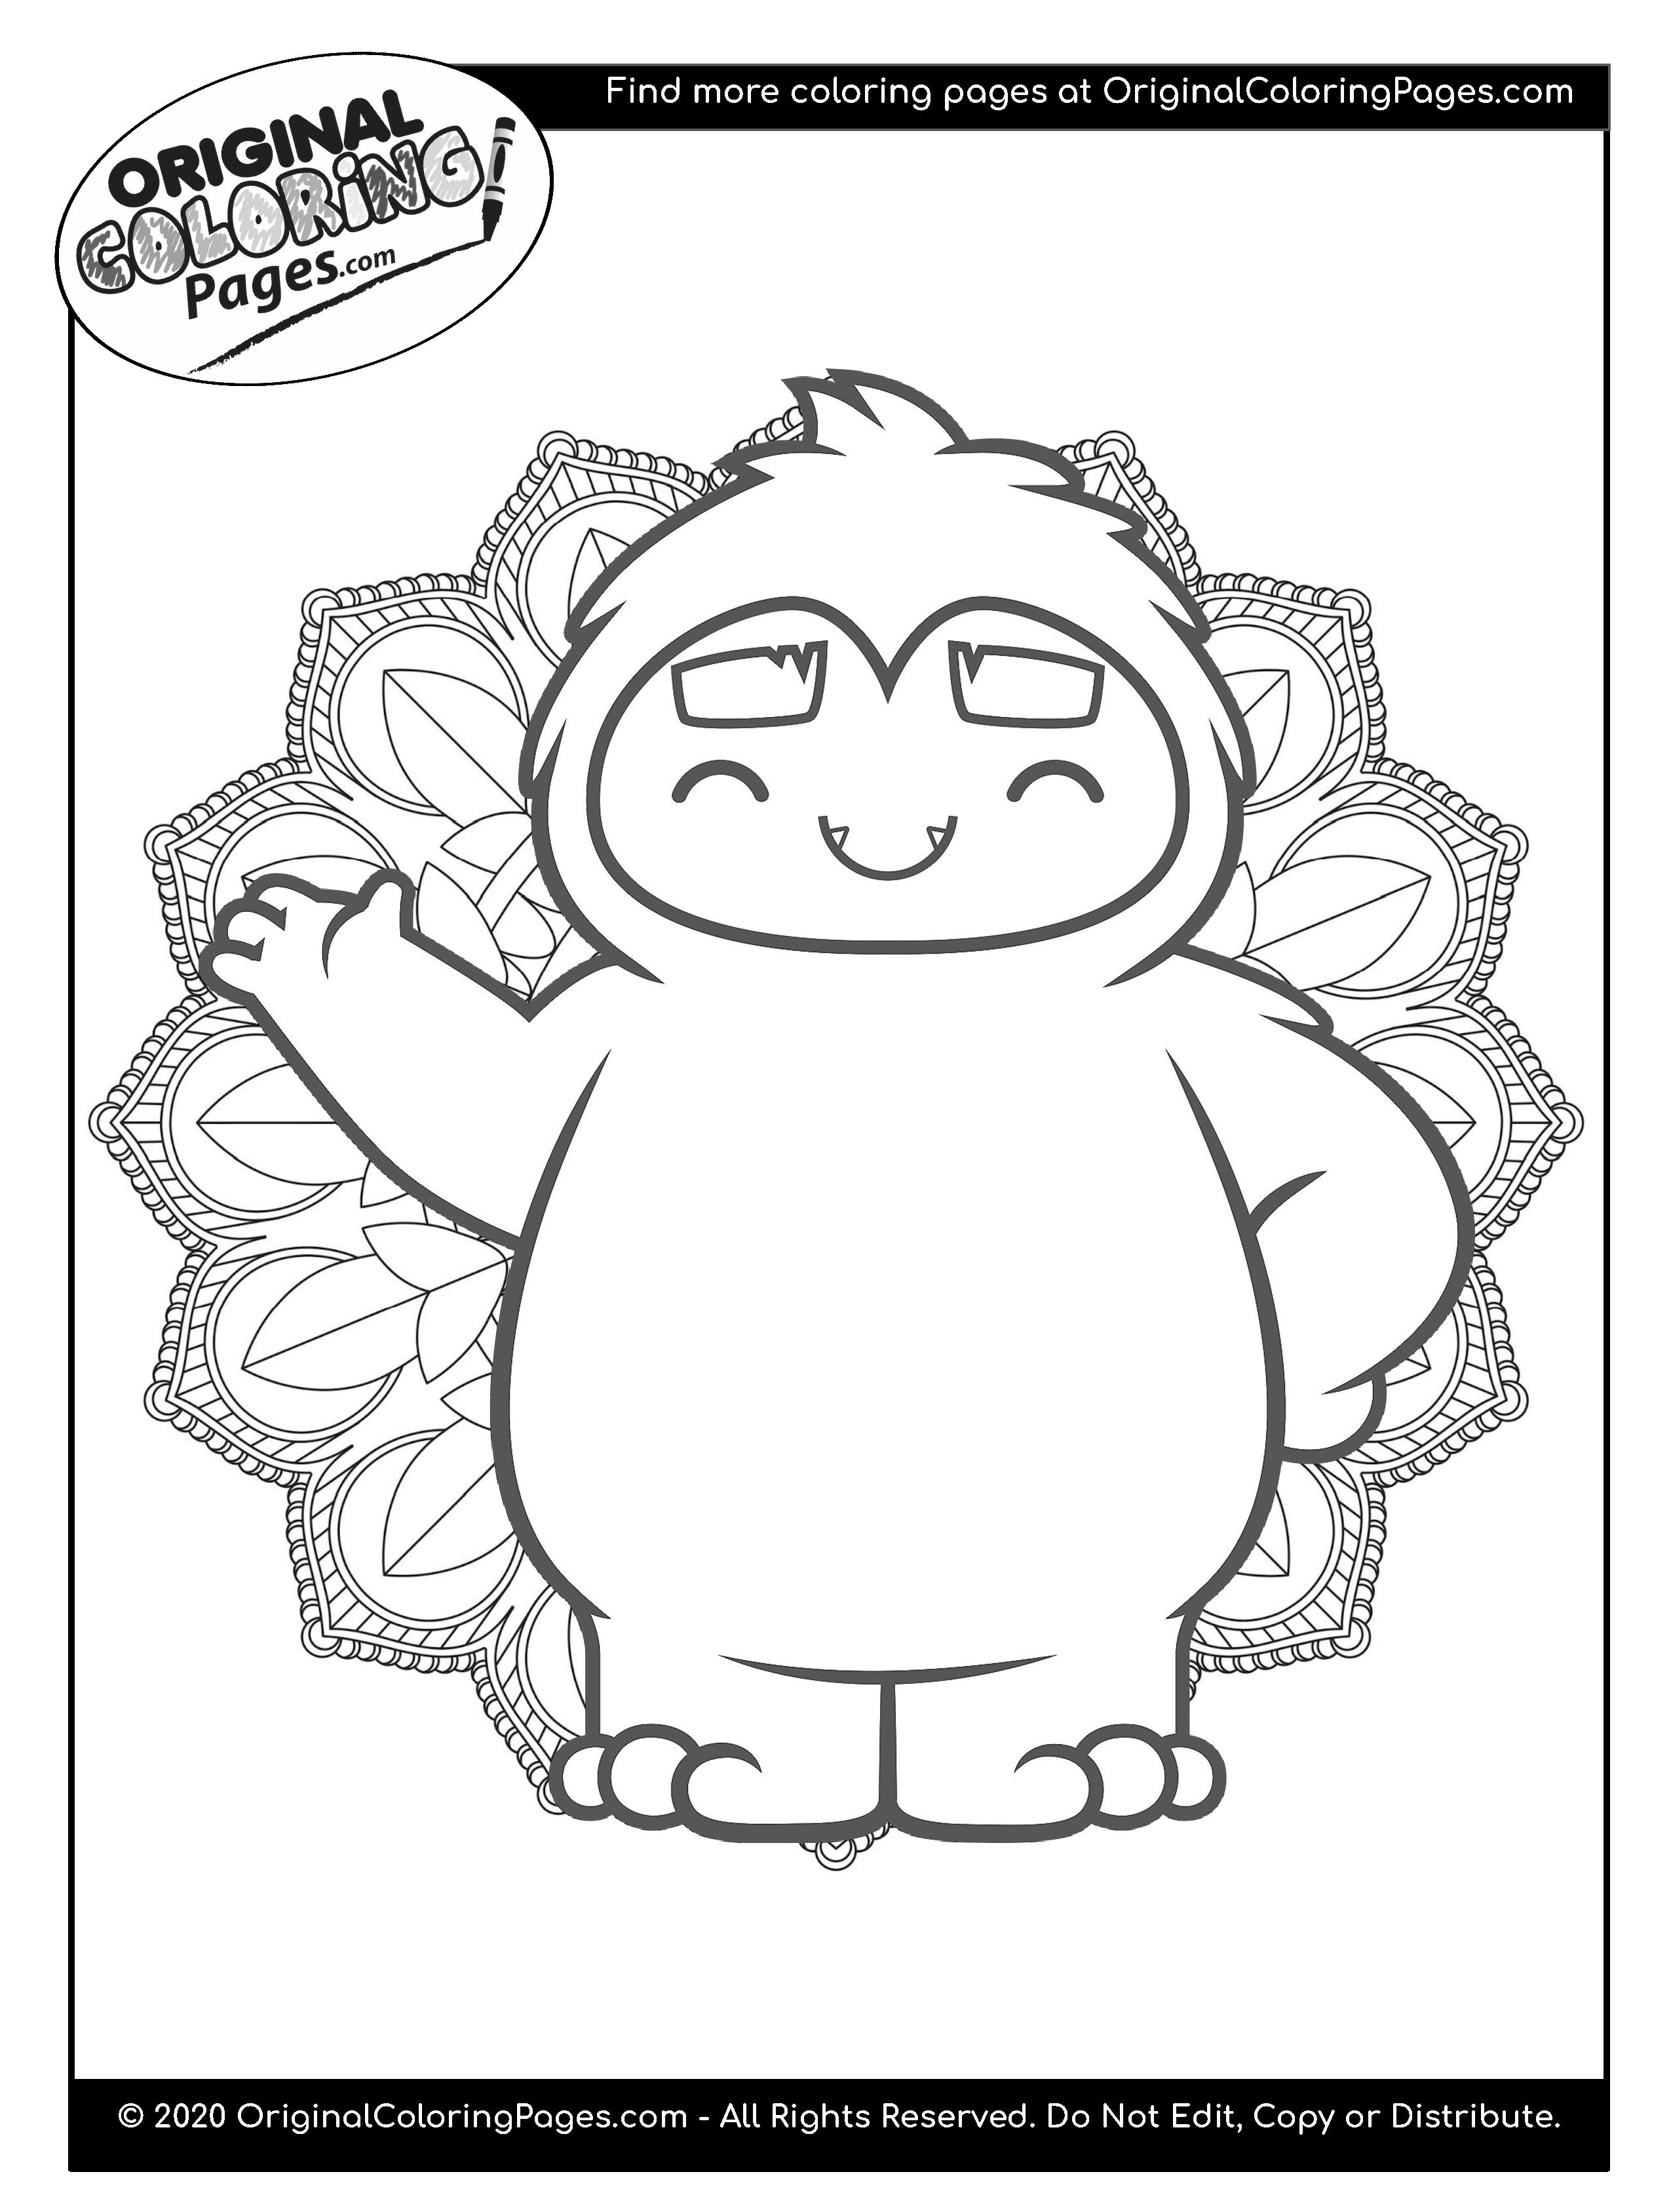 Snow Yeti Coloring Pages | Coloring Pages - Original Coloring Pages